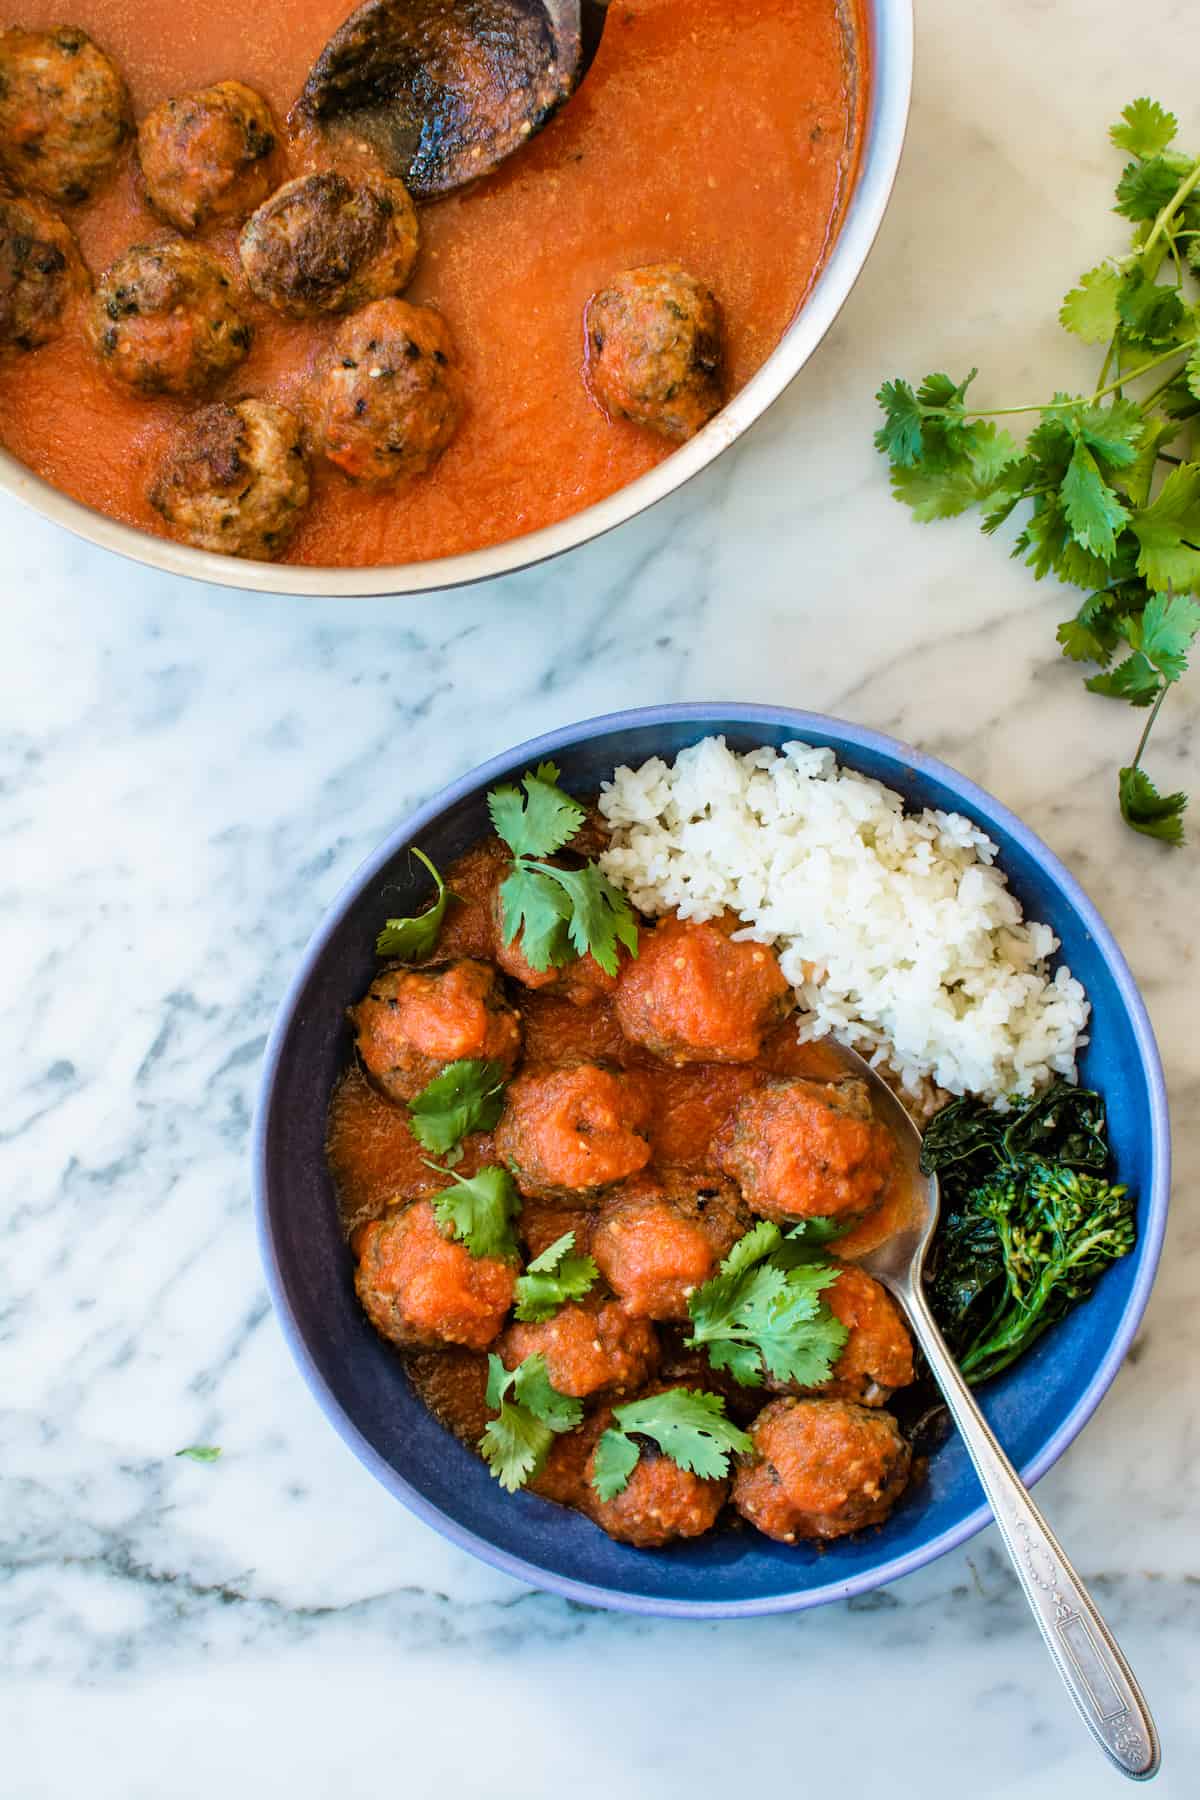 Pork Albondigas with Árbol Chile Tomato Sauce- an easy main dish, perfect for a quick meal. Tender meatballs made with lots of fresh herbs and ground pork in a slightly spicy, delicate tomato sauce. Serve with Coconut-Cilantro Rice and Garlicky Broccolini for a super tasty dinner. #pork #ad #albondigas #meatballs